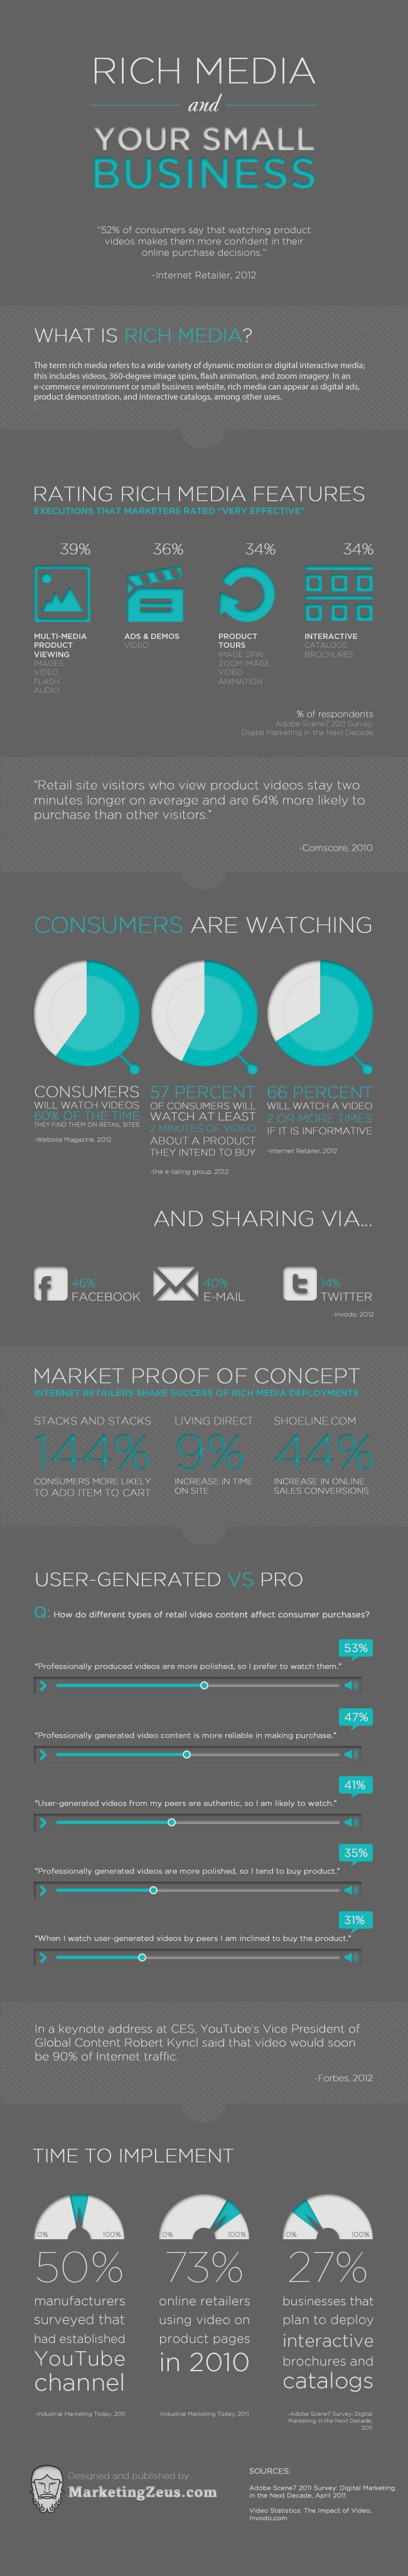 Business infographic : Rich Media [Infographic]... - InfographicNow.com ...